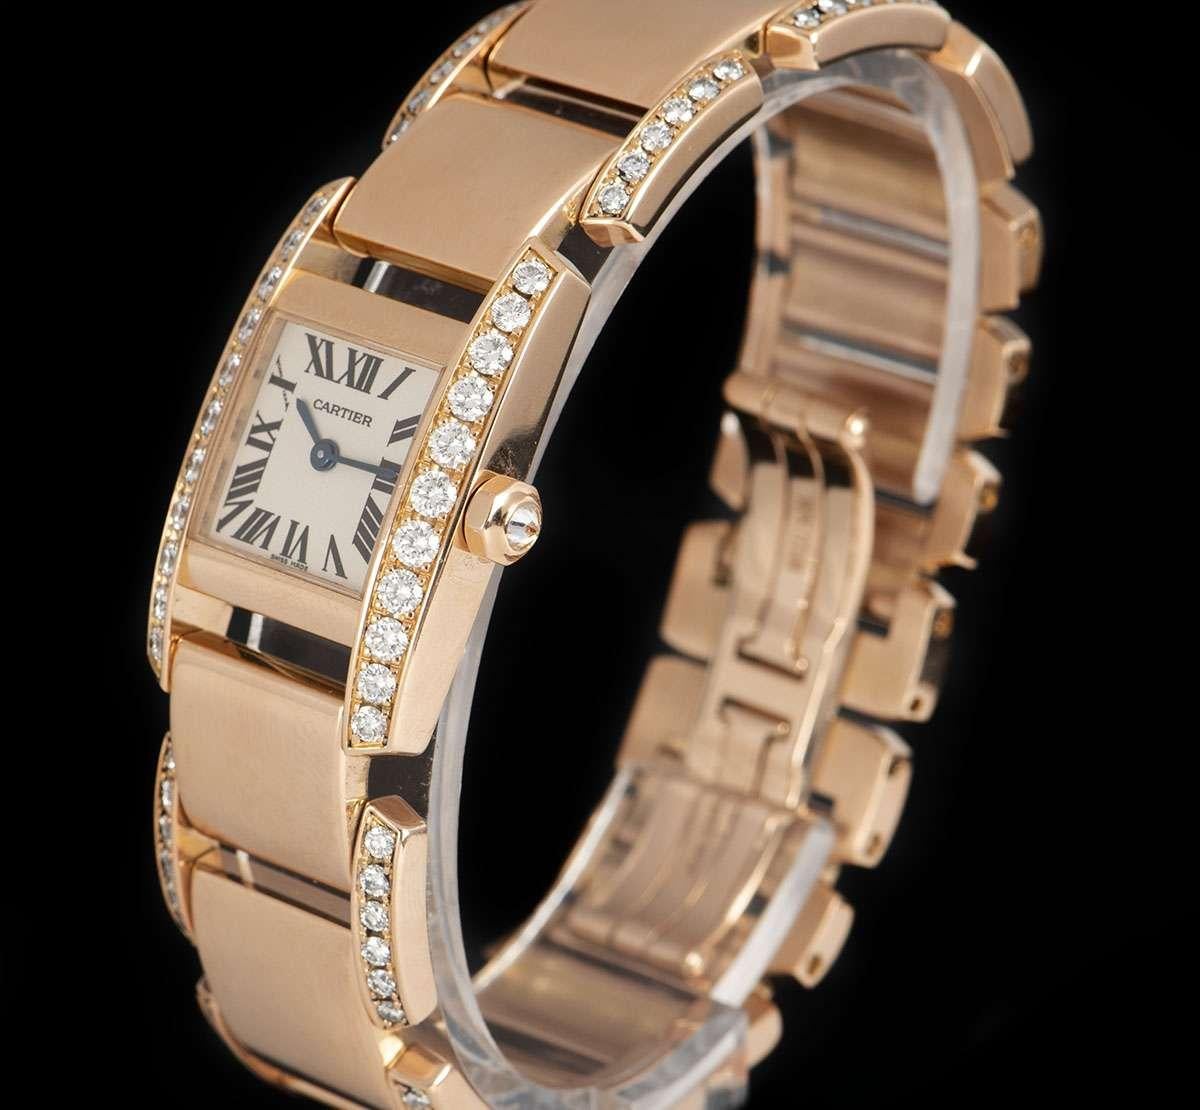 A 20 mm diamond set Tankissime women's wristwatch with a silver dial. 

Made from 18k rose gold, this luxury timepiece features a fixed bezel with 22 round brilliant cut diamonds, a single round brilliant cut diamond set to the crown and a gorgeous